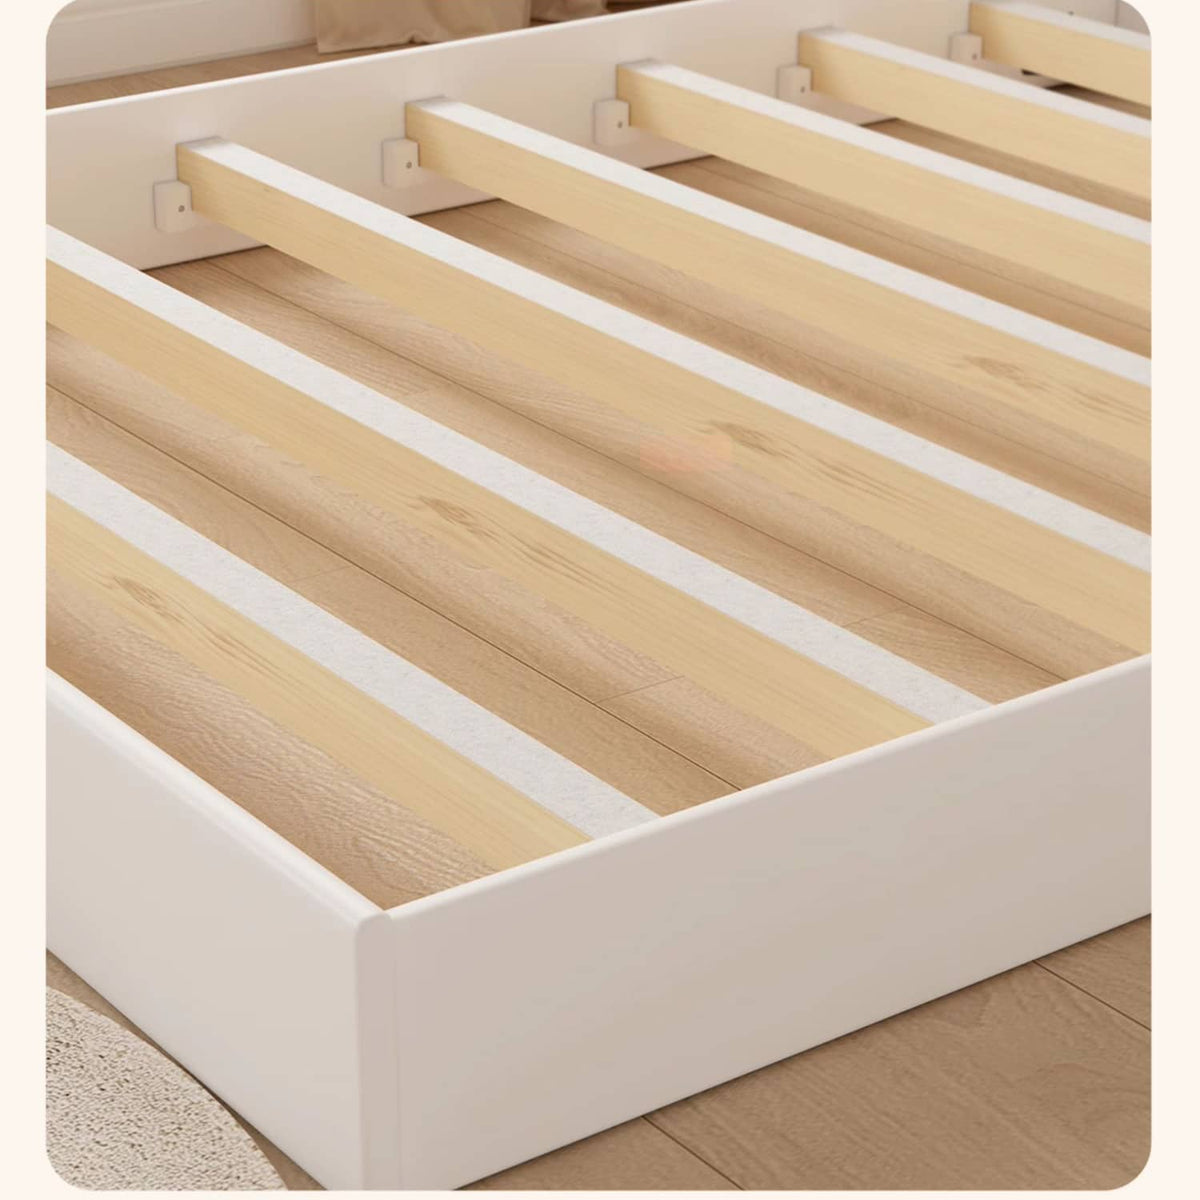 Elegant Wooden Bed with White Beech, Cedar, Pine, and Faux Leather Finish fslmz-1102